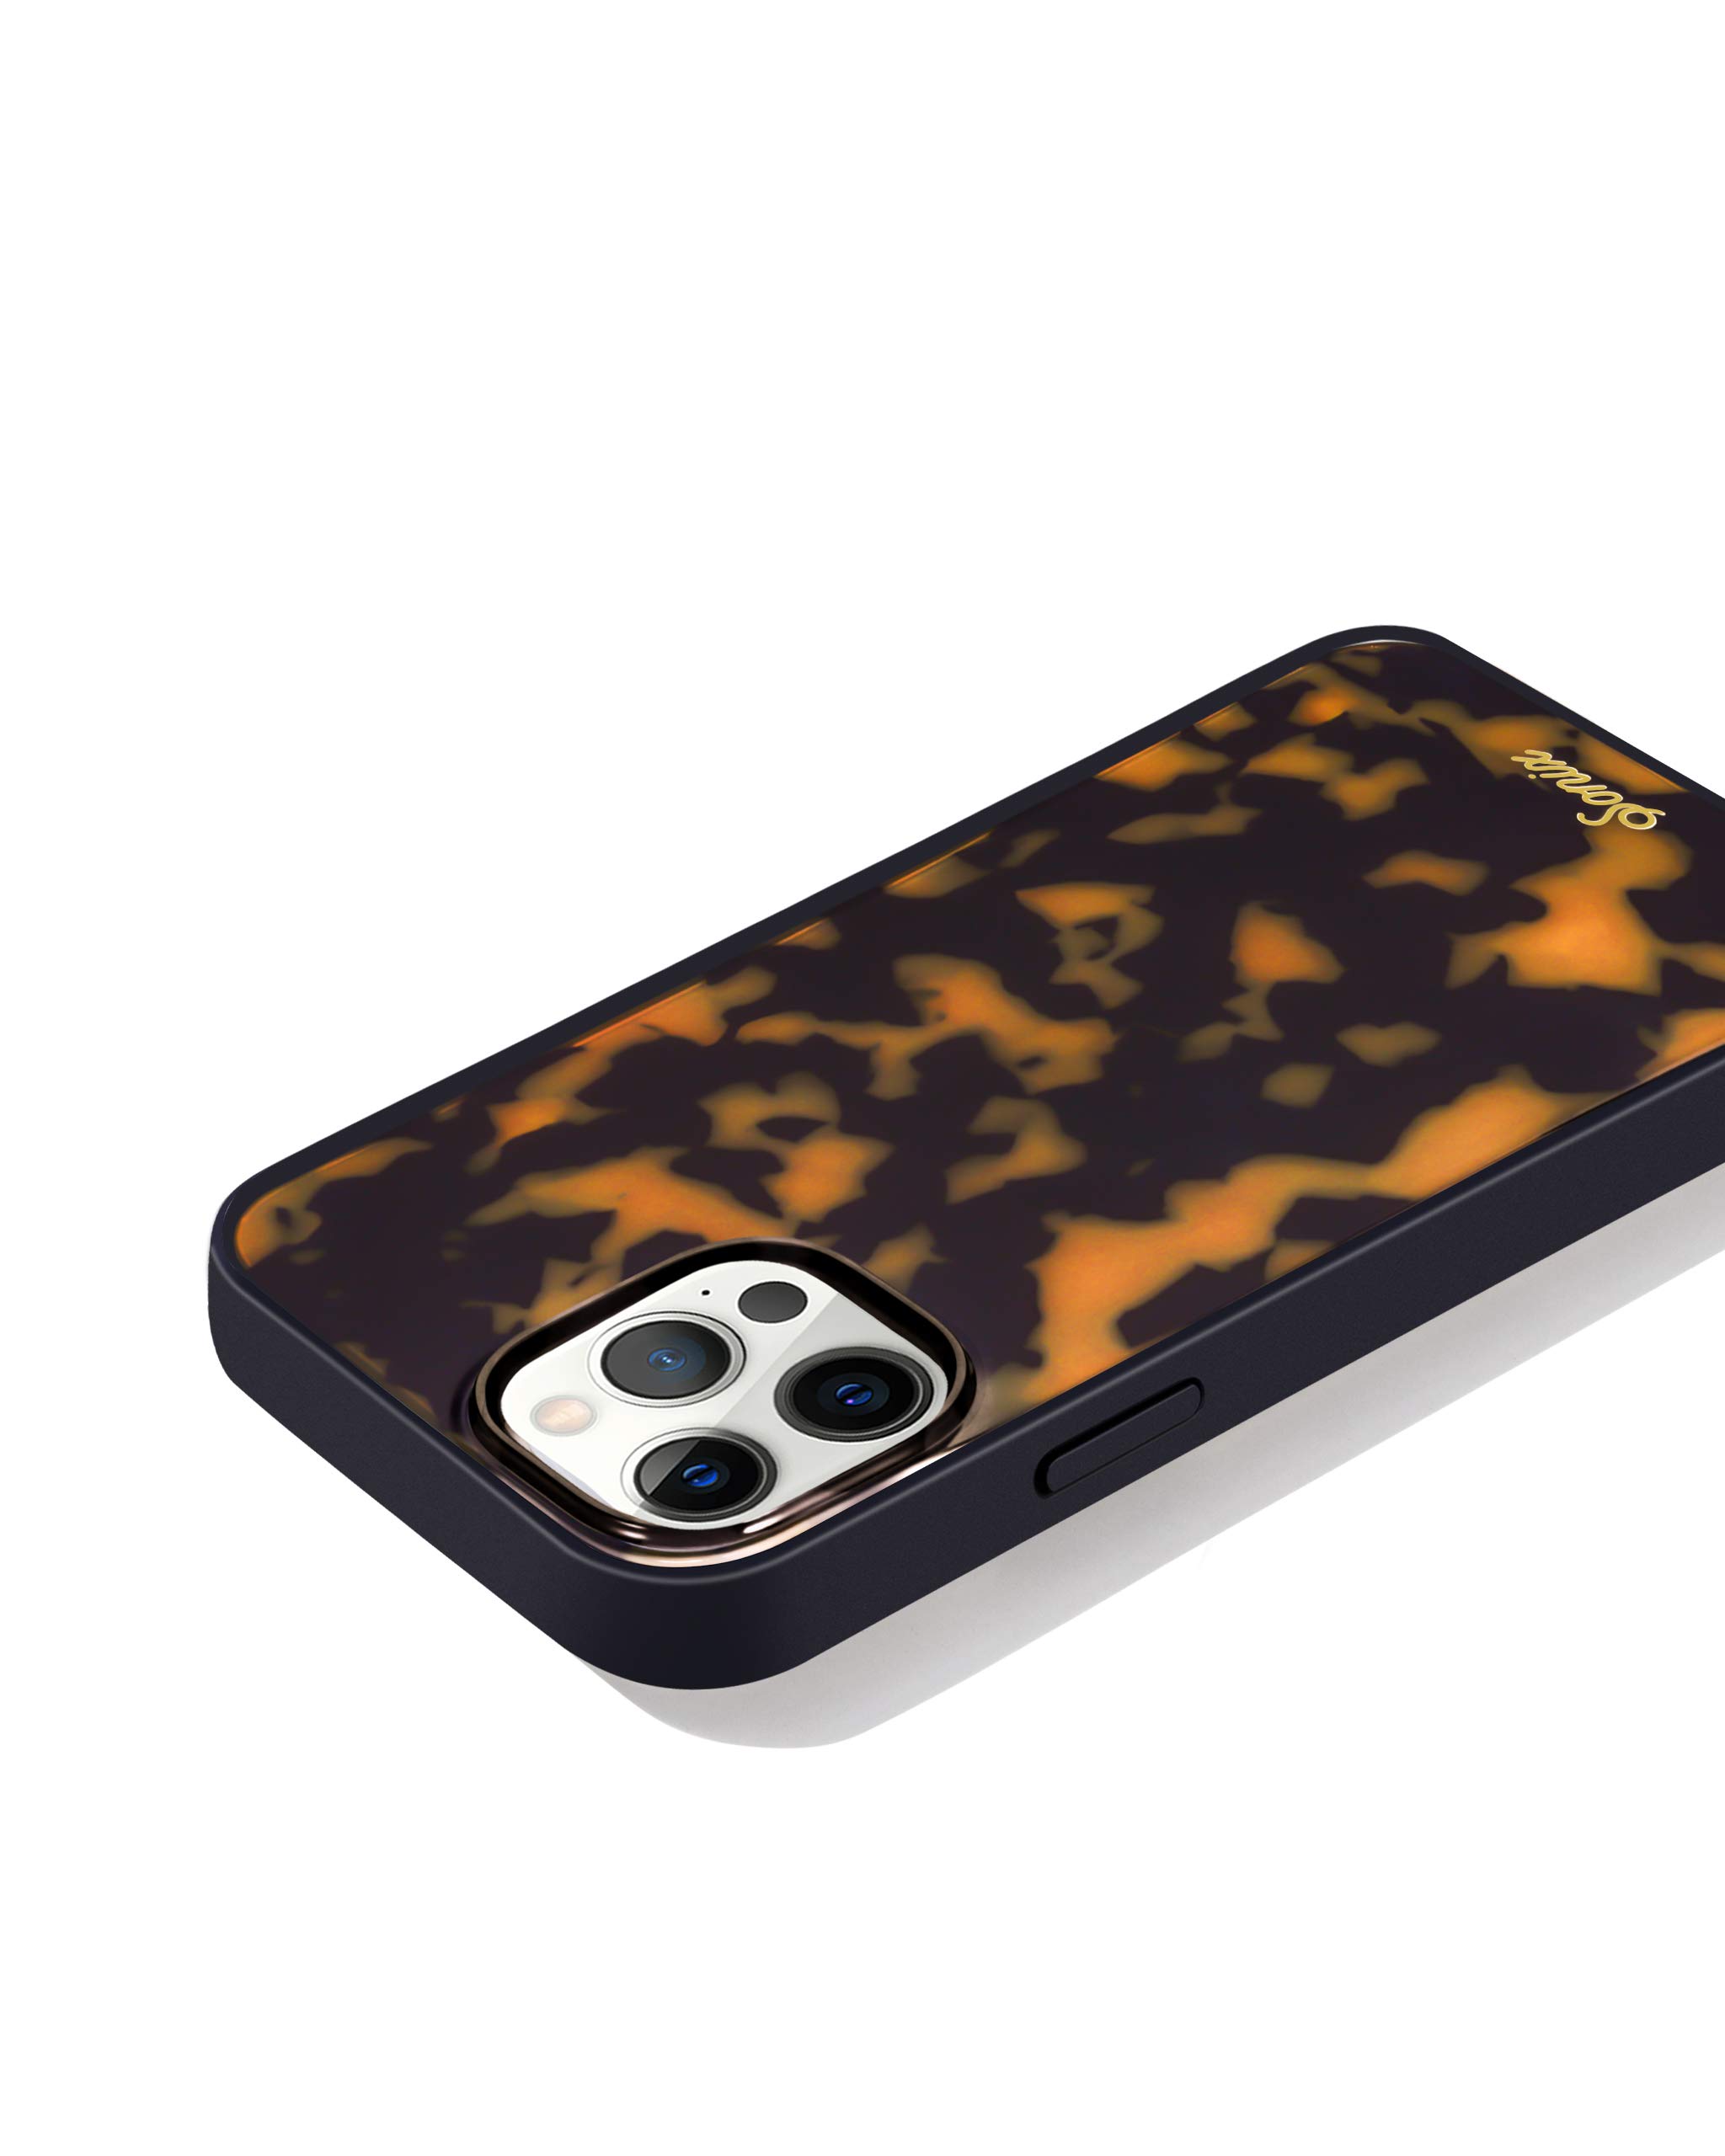 Sonix Brown Tort Case for iPhone 12 / 12Pro [10ft Drop Tested] Women's Protective Tortoiseshell Leopard Cover for Apple iPhone 12, iPhone 12 Pro